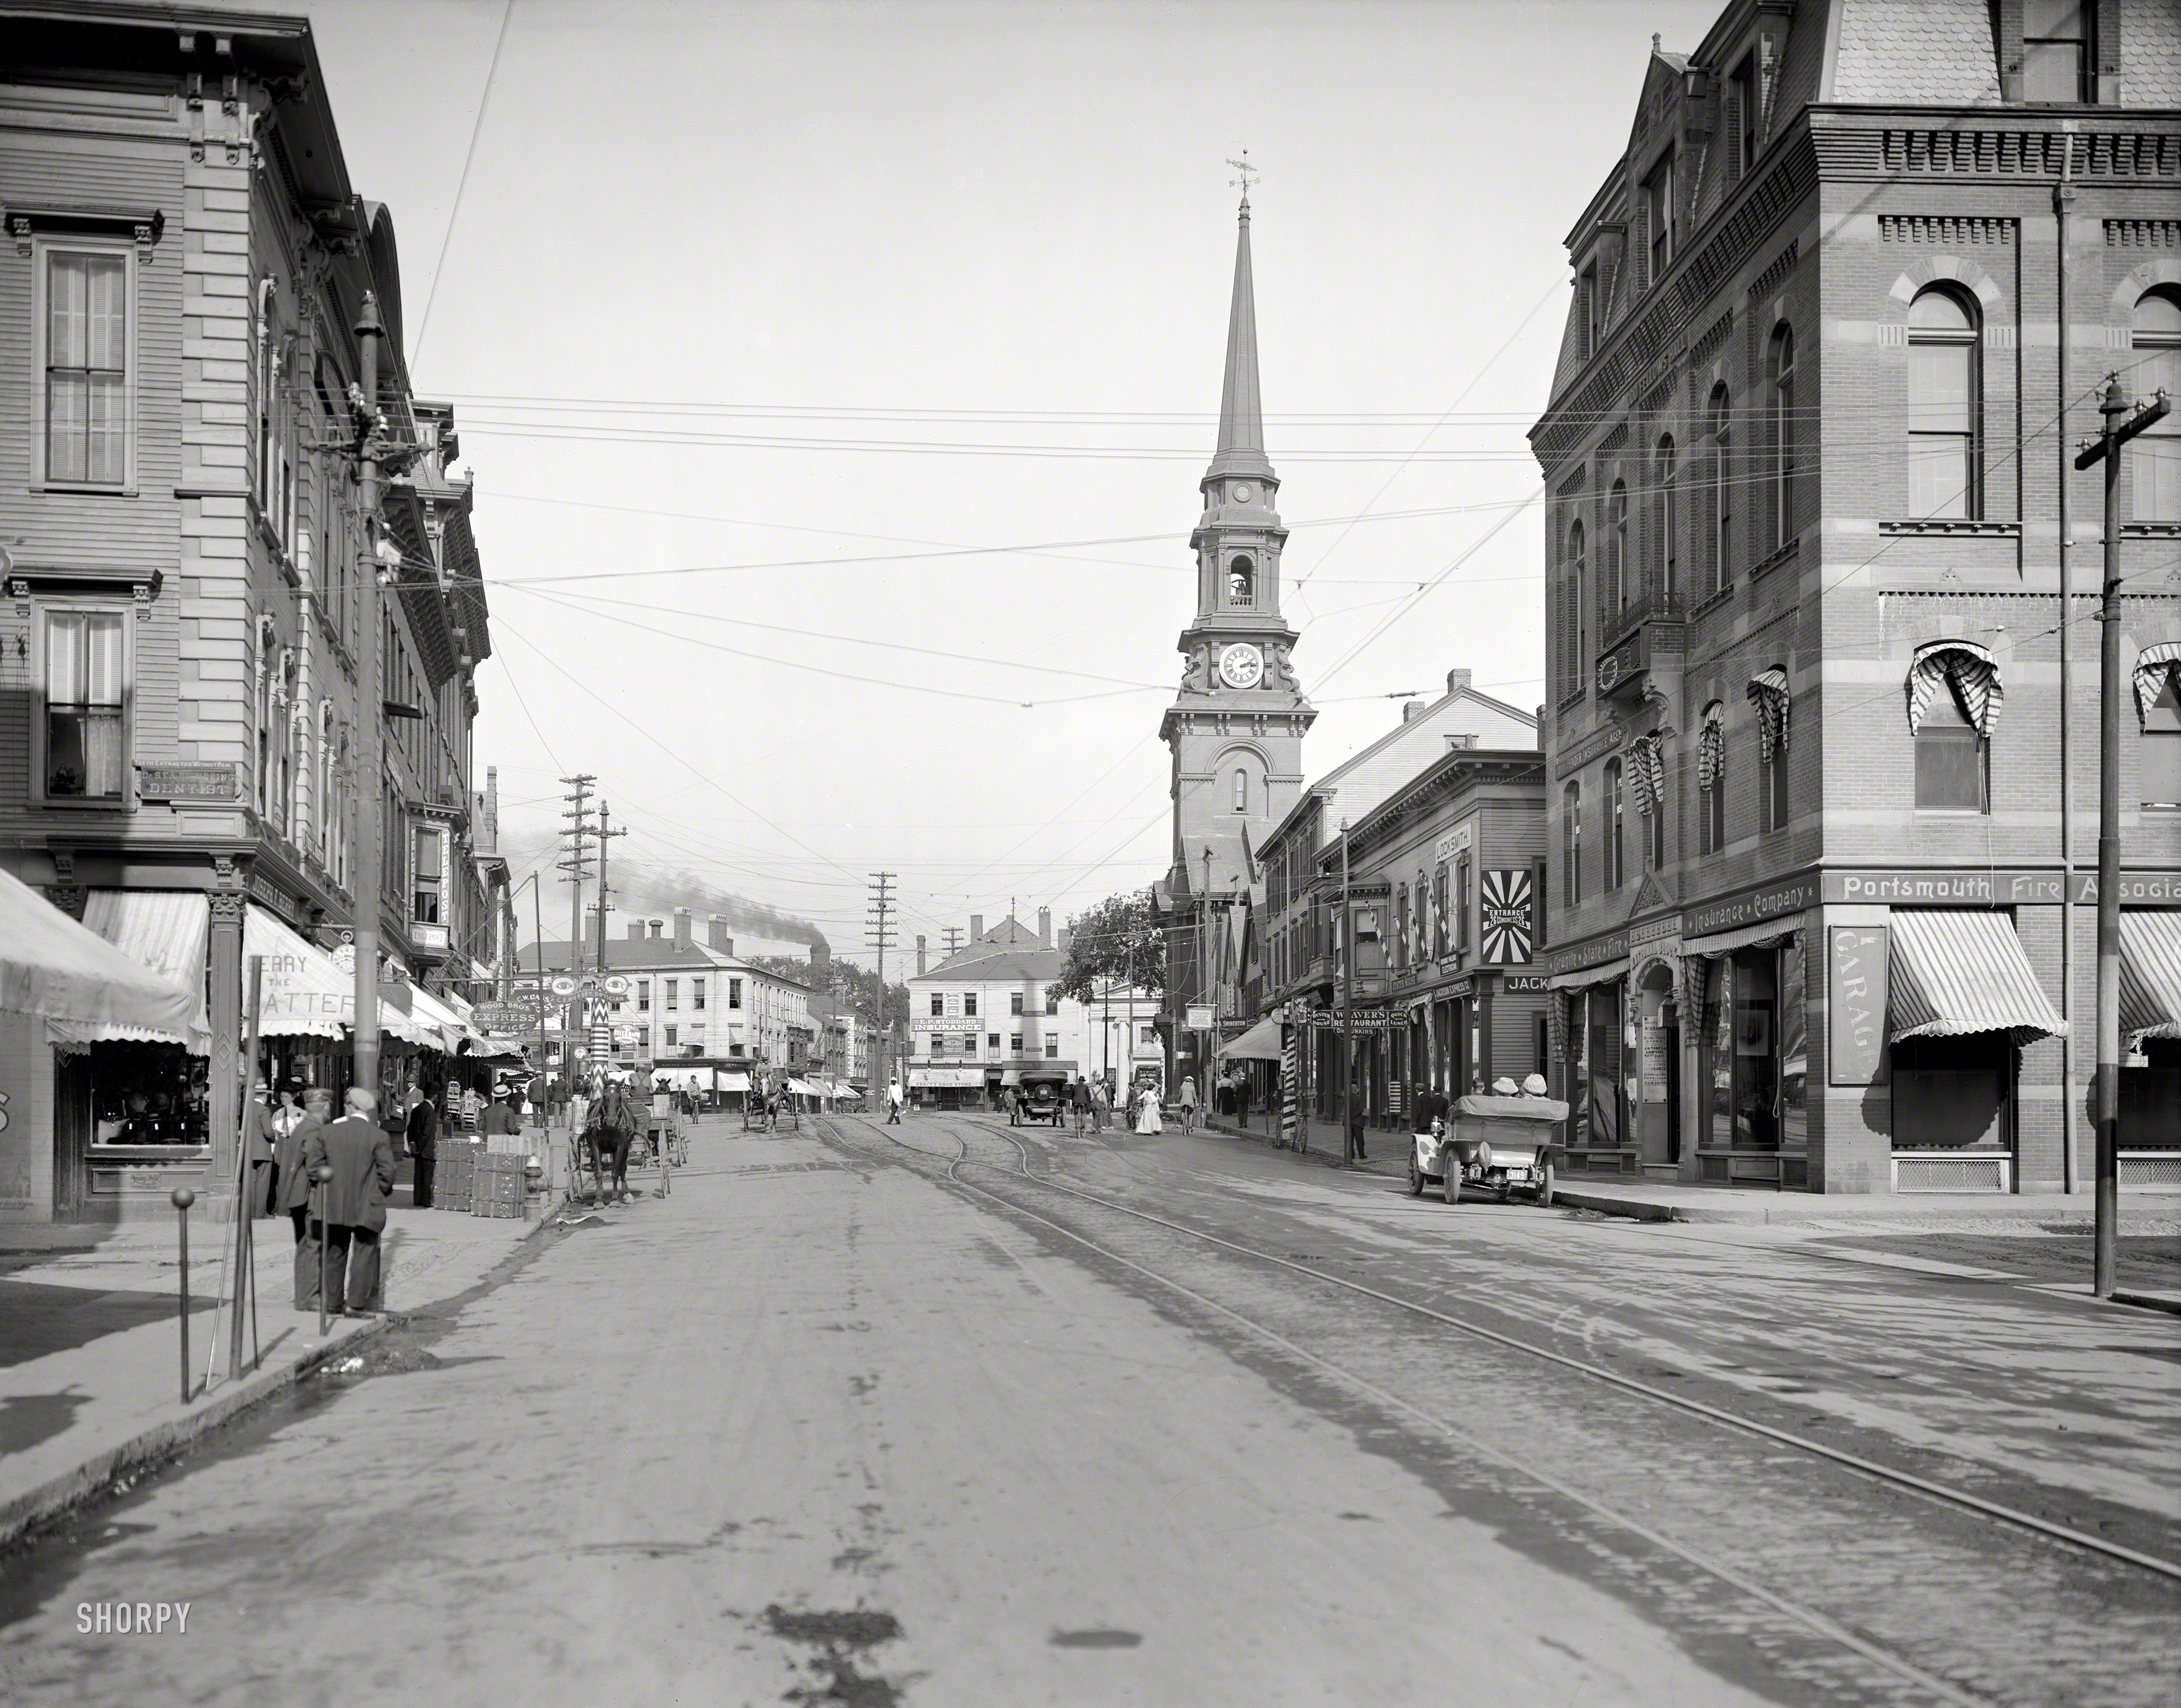 Portsmouth, New Hampshire, circa 1909. "Congress Street near Market Square." With at least two painless dentists, an optician, hatter and oyster house among the merchants vying for your trade. 8x10 inch glass negative. View full size.